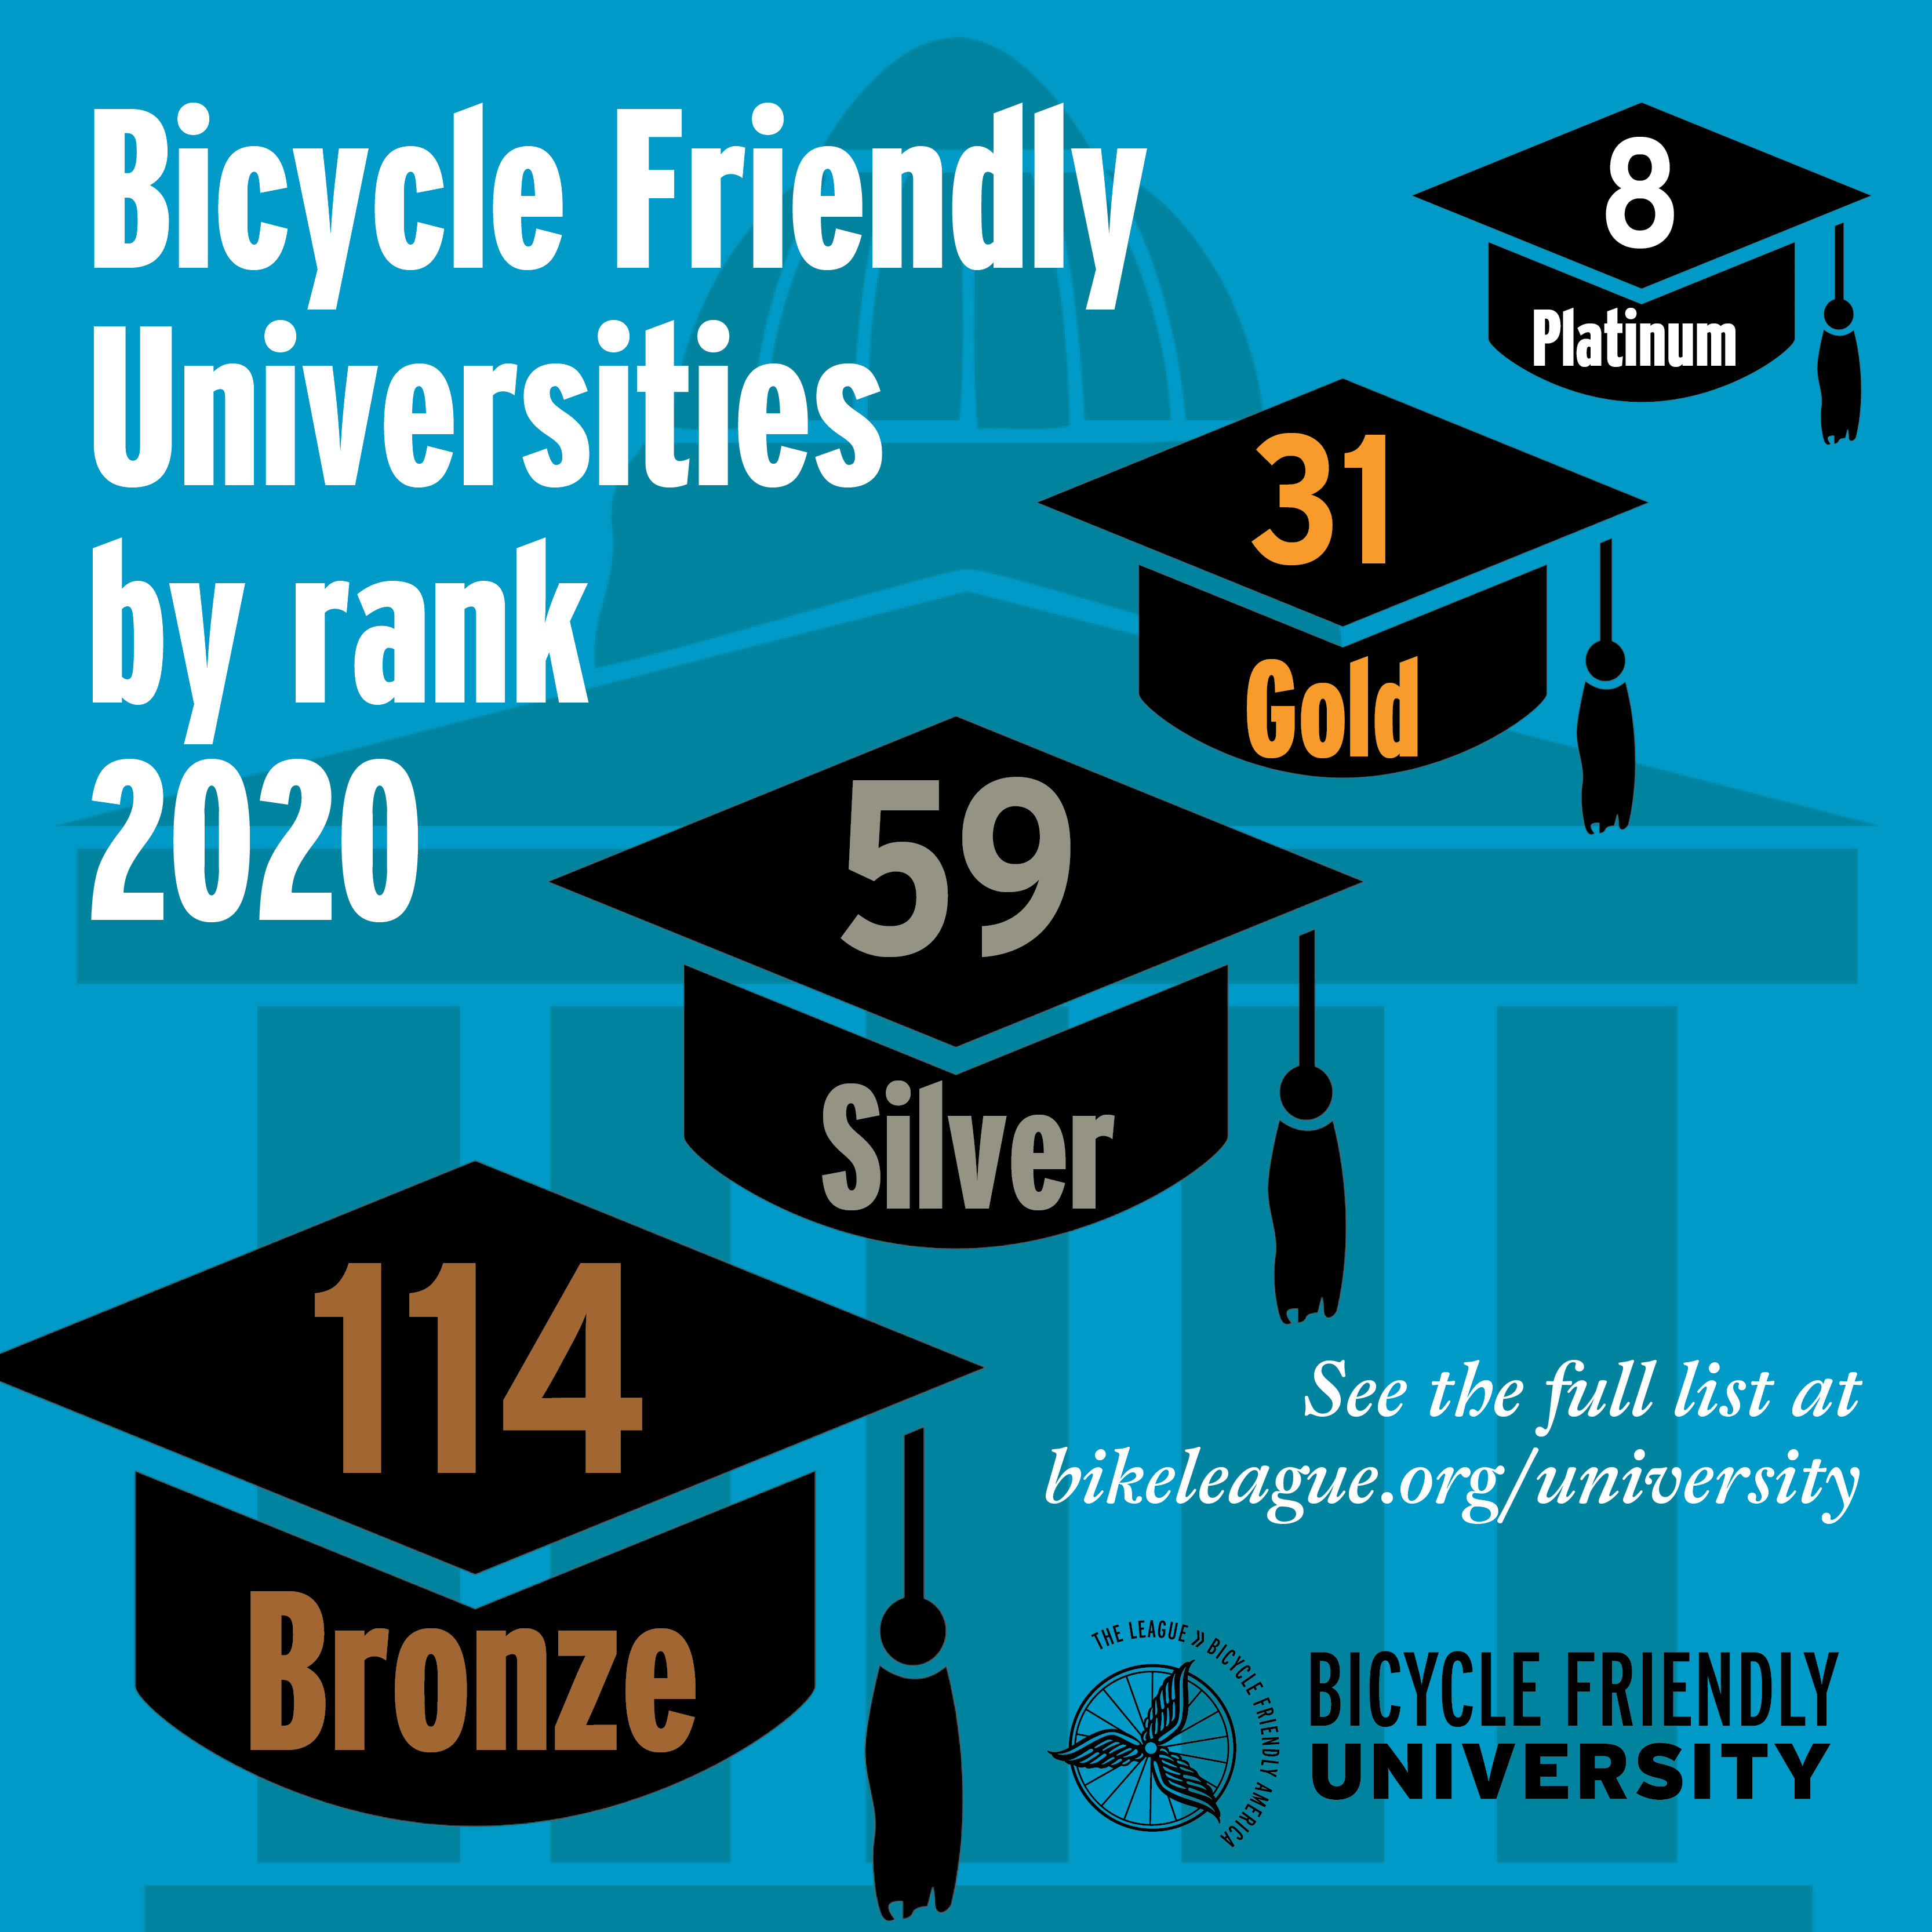 A graphic of graduation caps representing each award level; the gold cap states there are 31 recognized universities in that tier as of 2020.